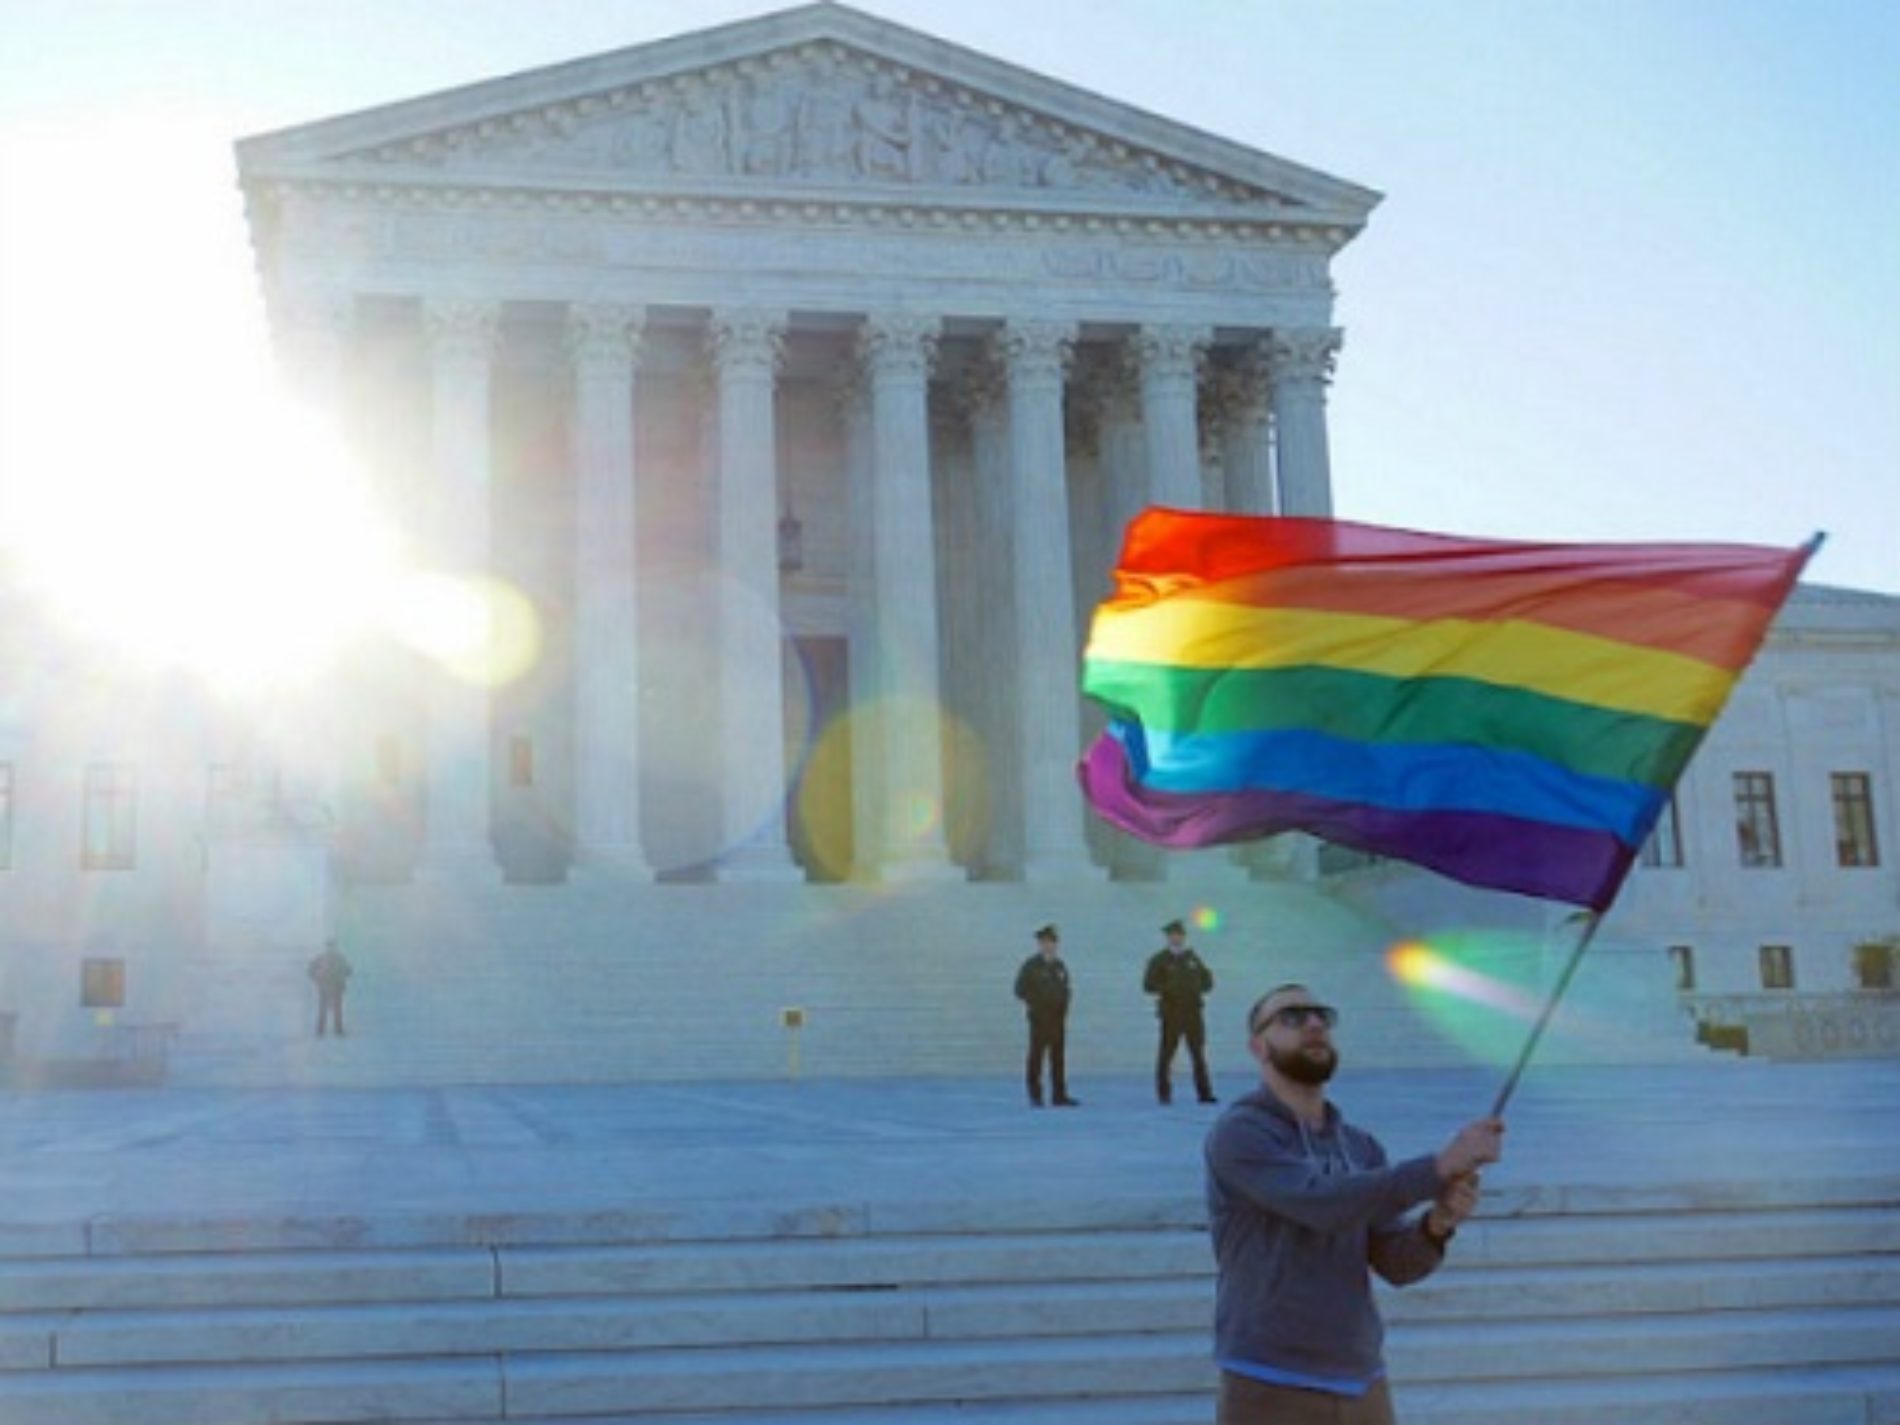 Movie About SCOTUS Case On Marriage Equality Already in the Works